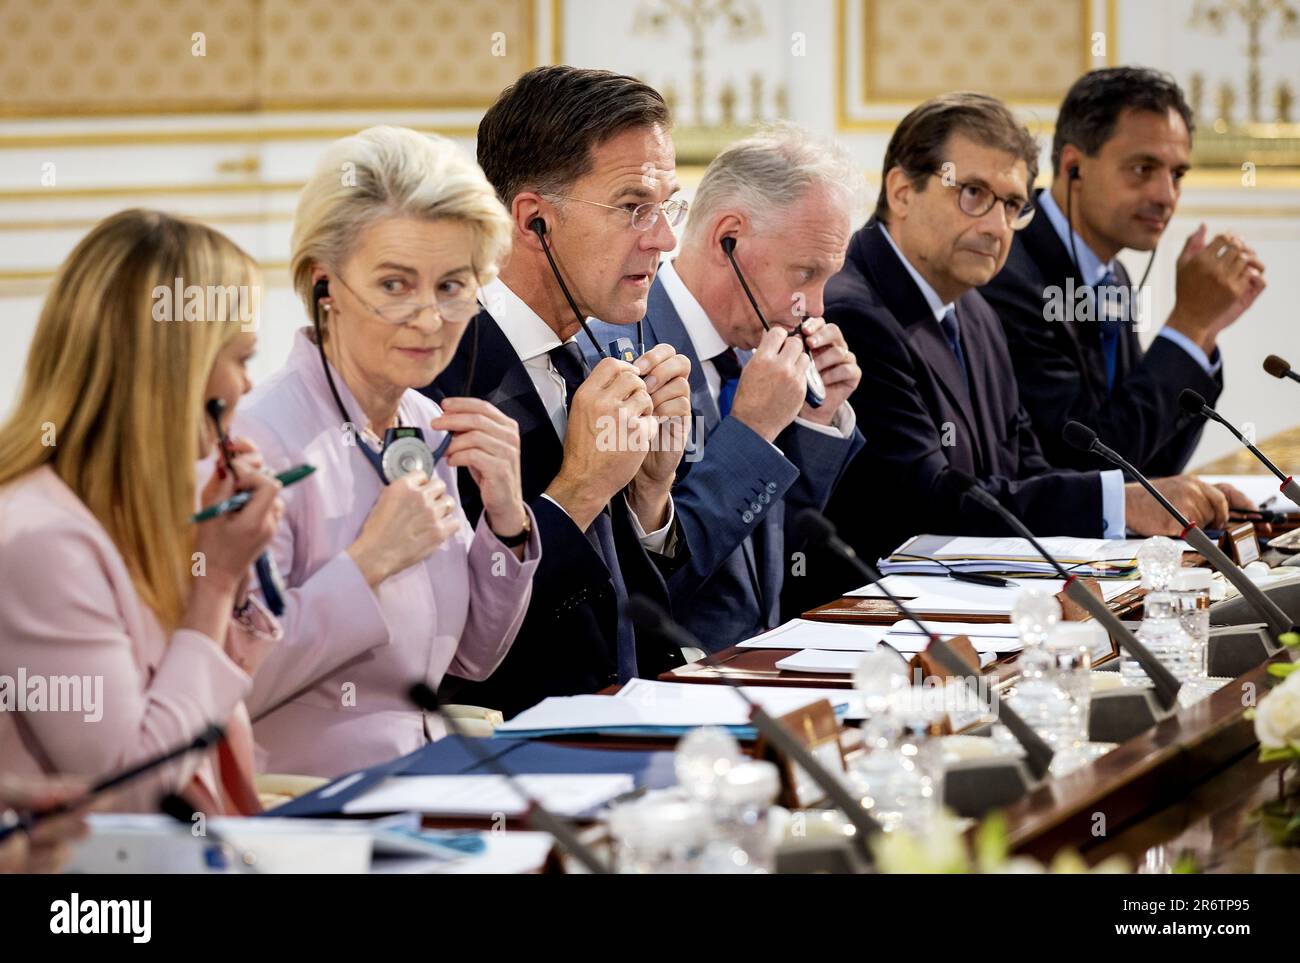 TUNIS - Prime Minister Mark Rutte, together with President Ursula von der Leyen of the European Commission and Italian Prime Minister Giorgia Meloni, visits Tunisian President Kais Saied. The European Union wants to make agreements with the North African country to curb illegal migration. ANP KOEN VAN WEEL netherlands out - belgium out Stock Photo